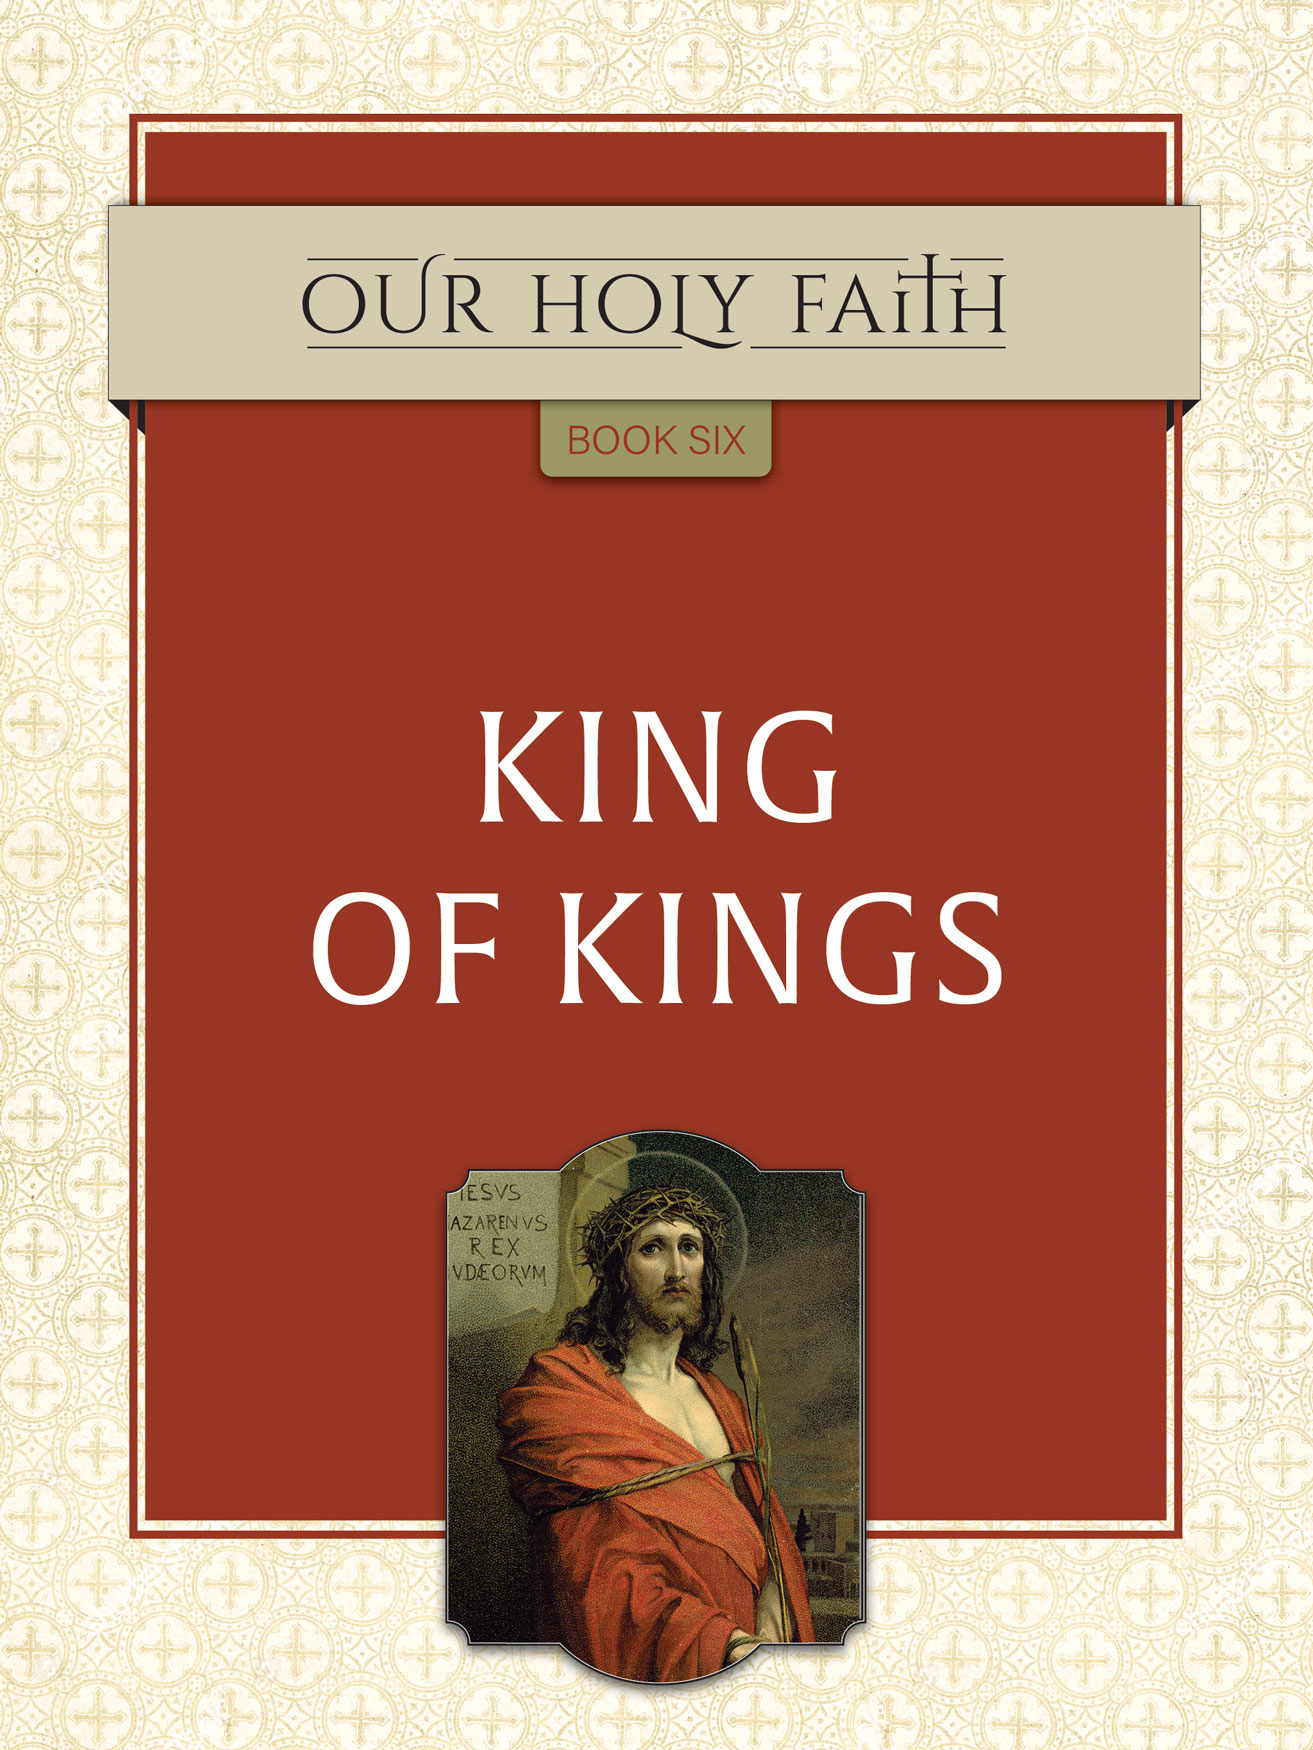 Our Holy Faith Book 6 King of Kings